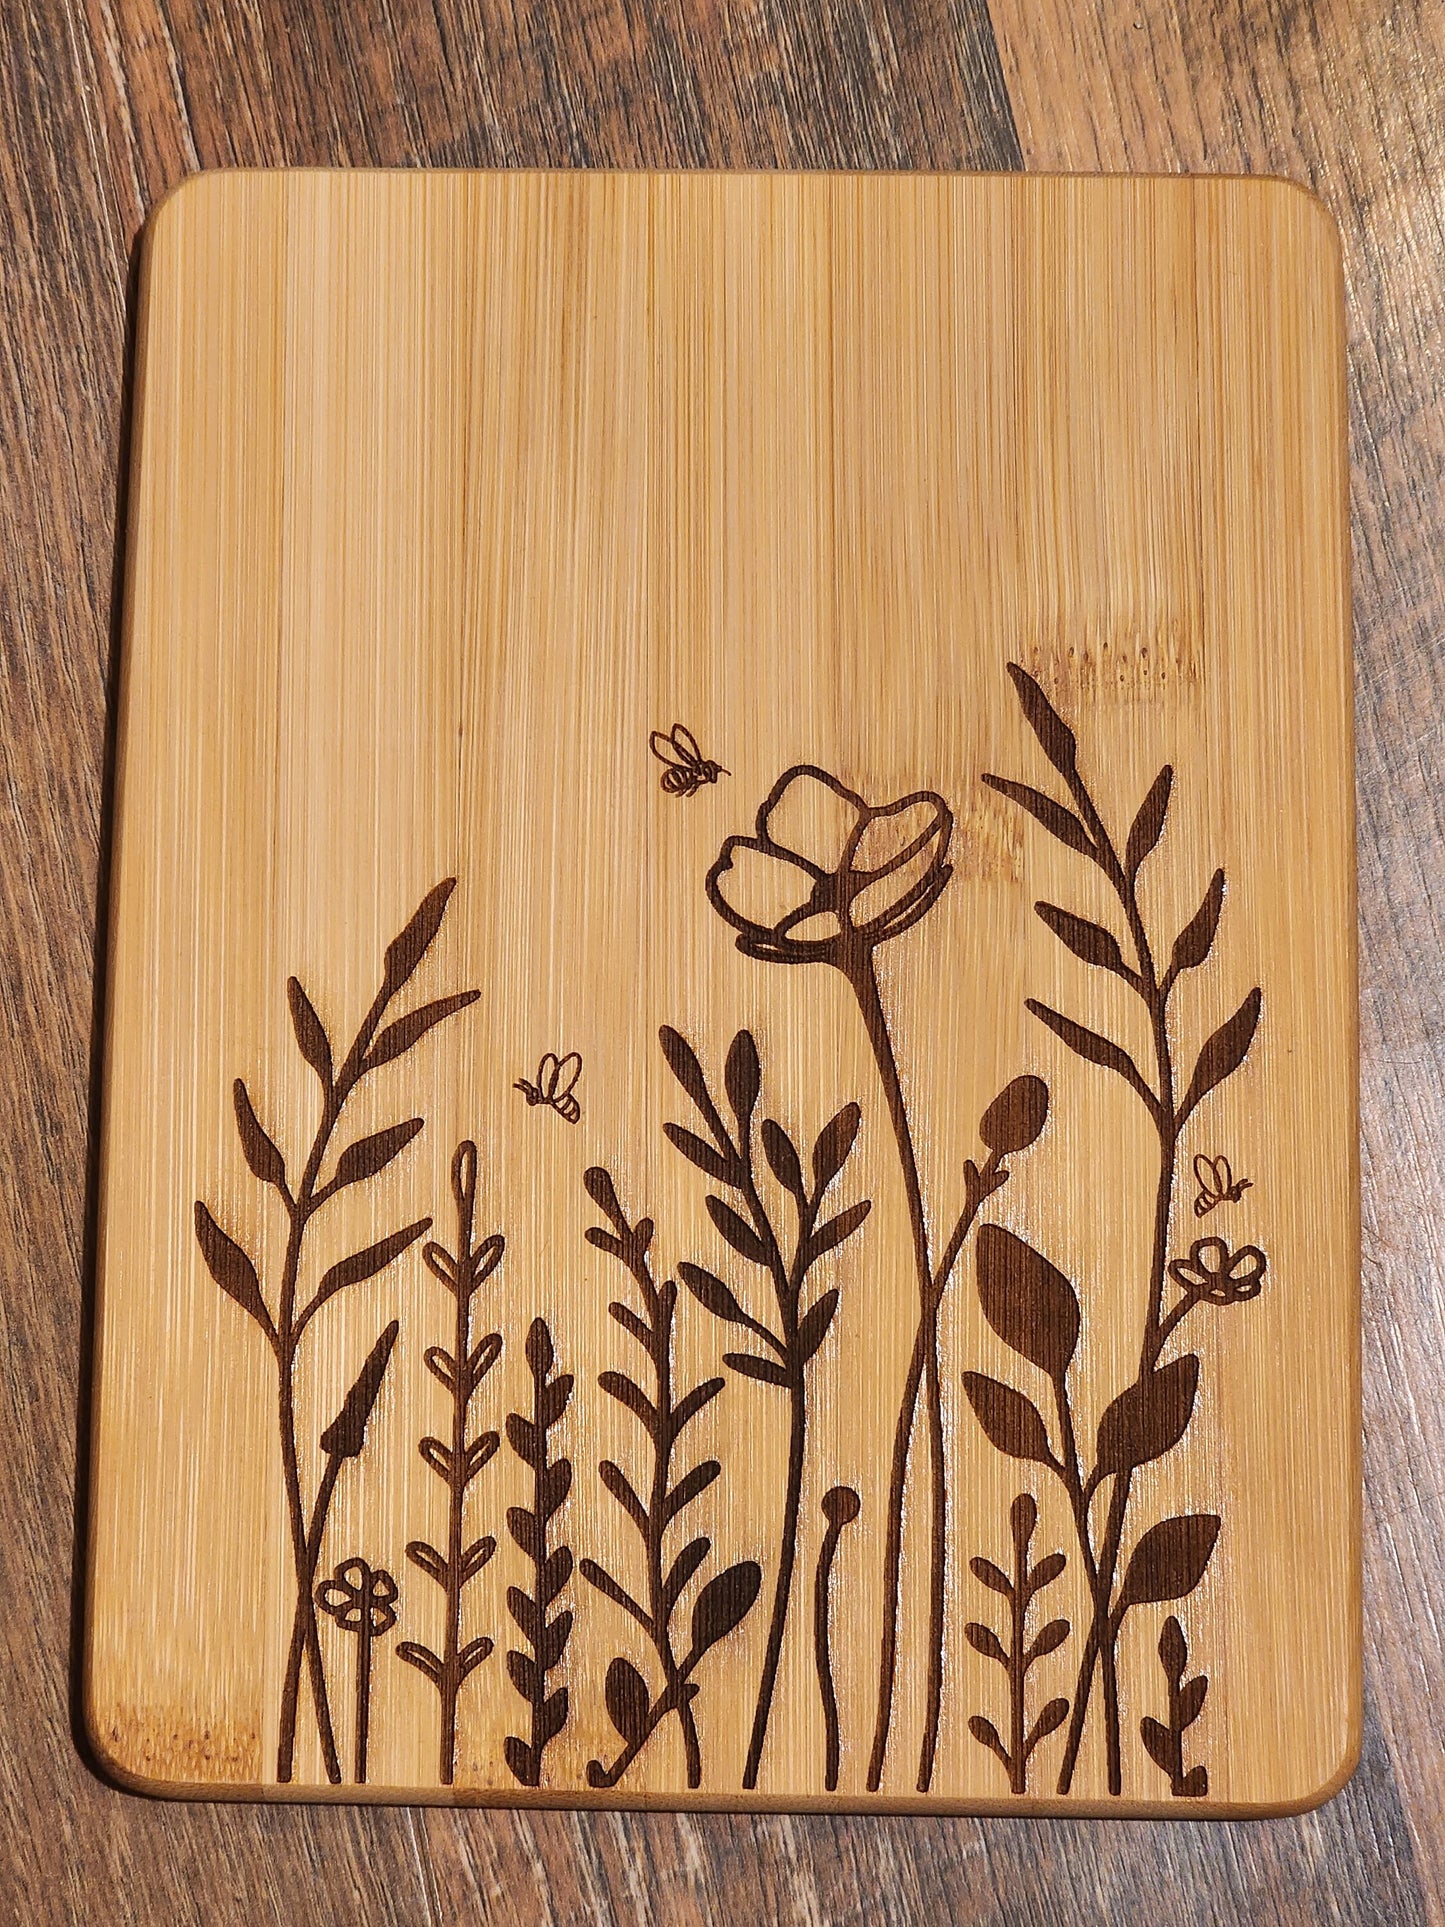 Wild Flower and Bees, western, country etched Bamboo Wood Cutting Board  - 8.75 x 6.875 inches